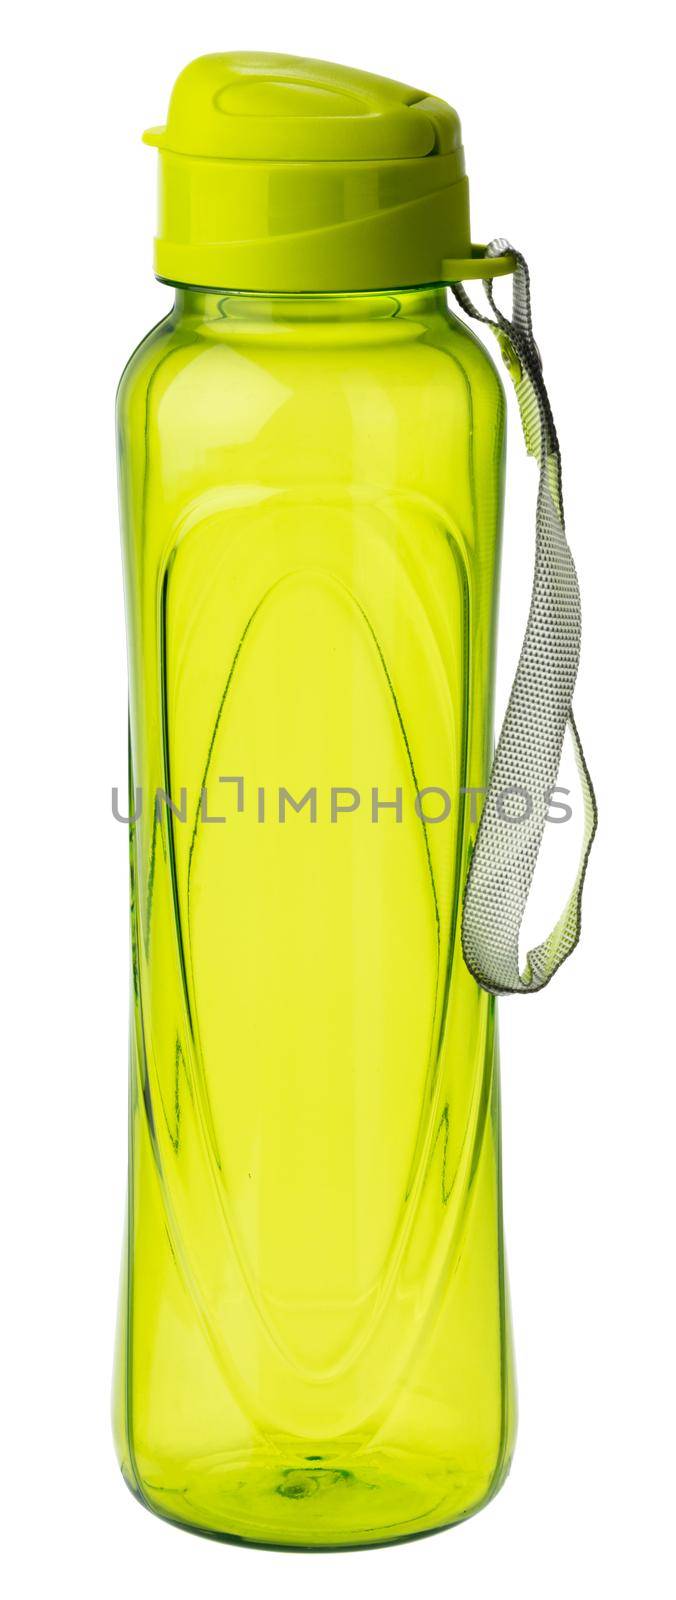 Empty plastic bottle for drinks isolated on white background